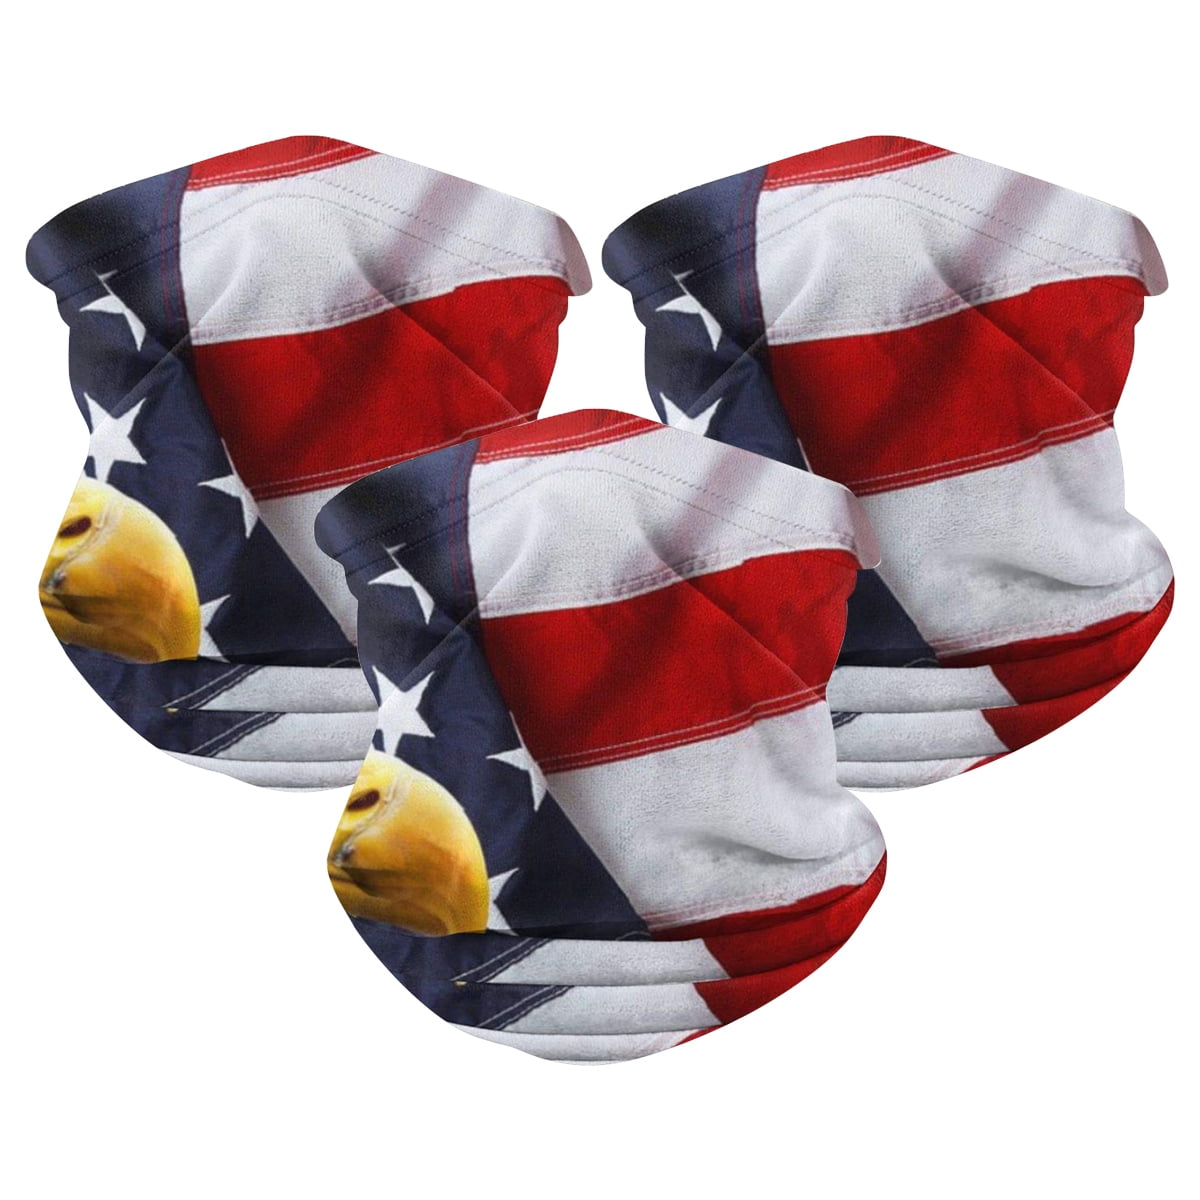 Boating,Headwear US FLAG UV SUN PROTECTION FACE MASK,NECK SCARF,Fishing 